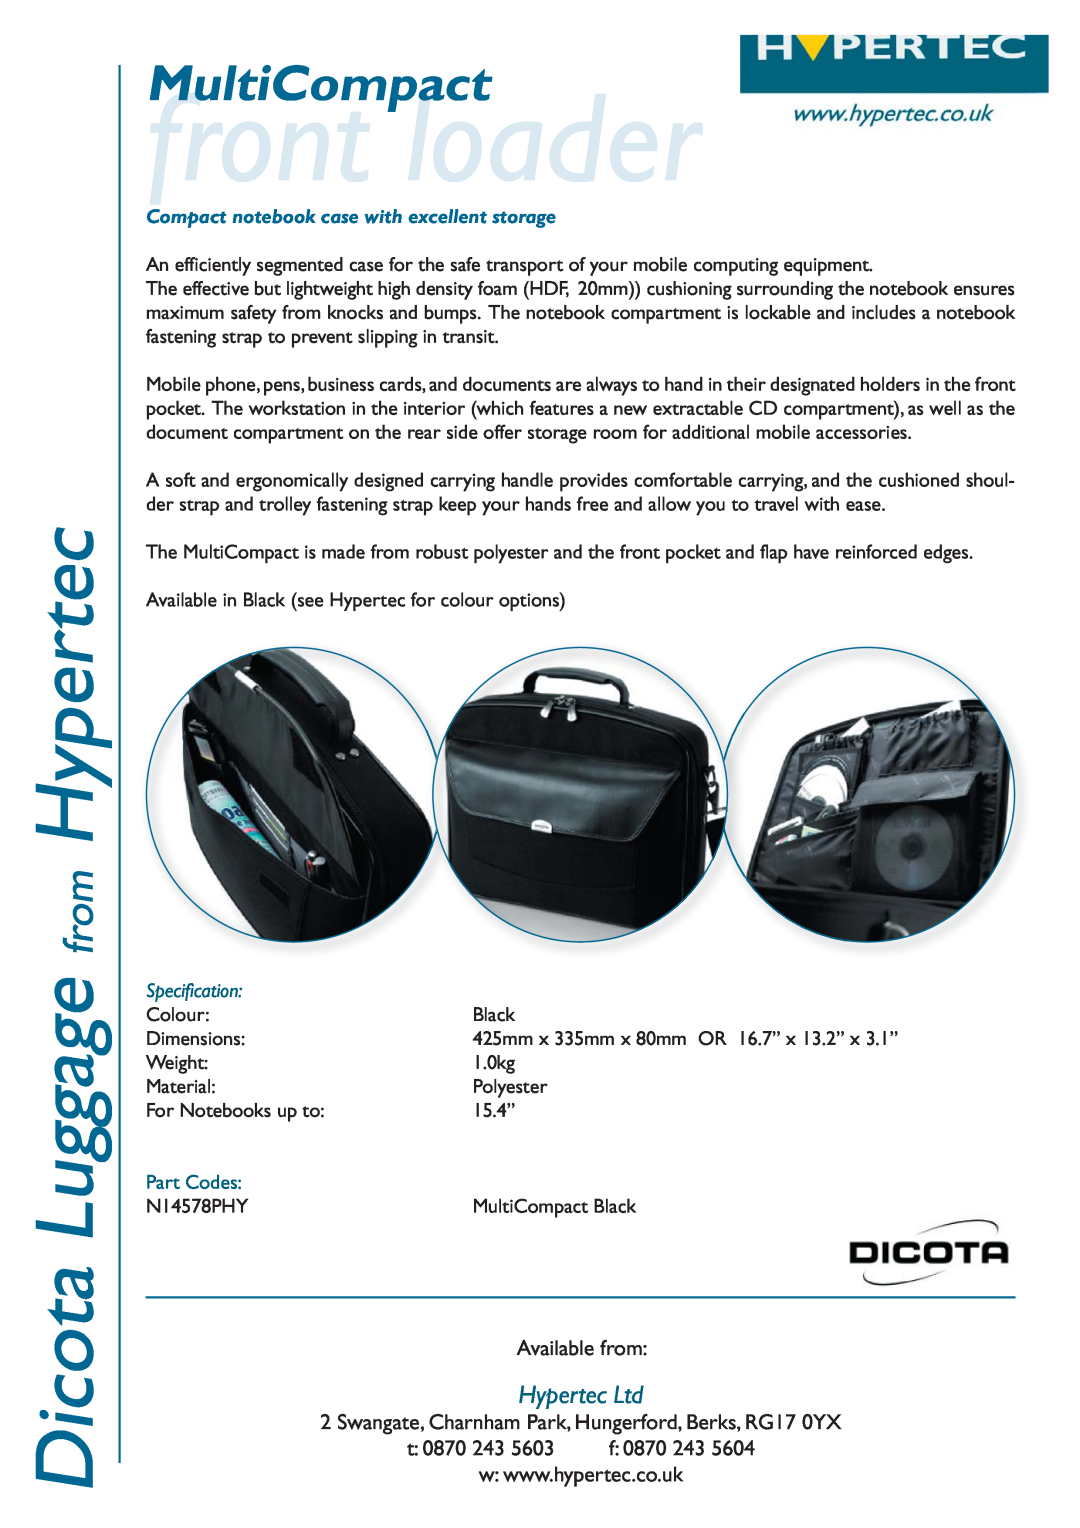 Hypertec N14578PHY dimensions front loader, Dicota Luggage from Hypertec, MultiCompact, Available from, t 0870 243 